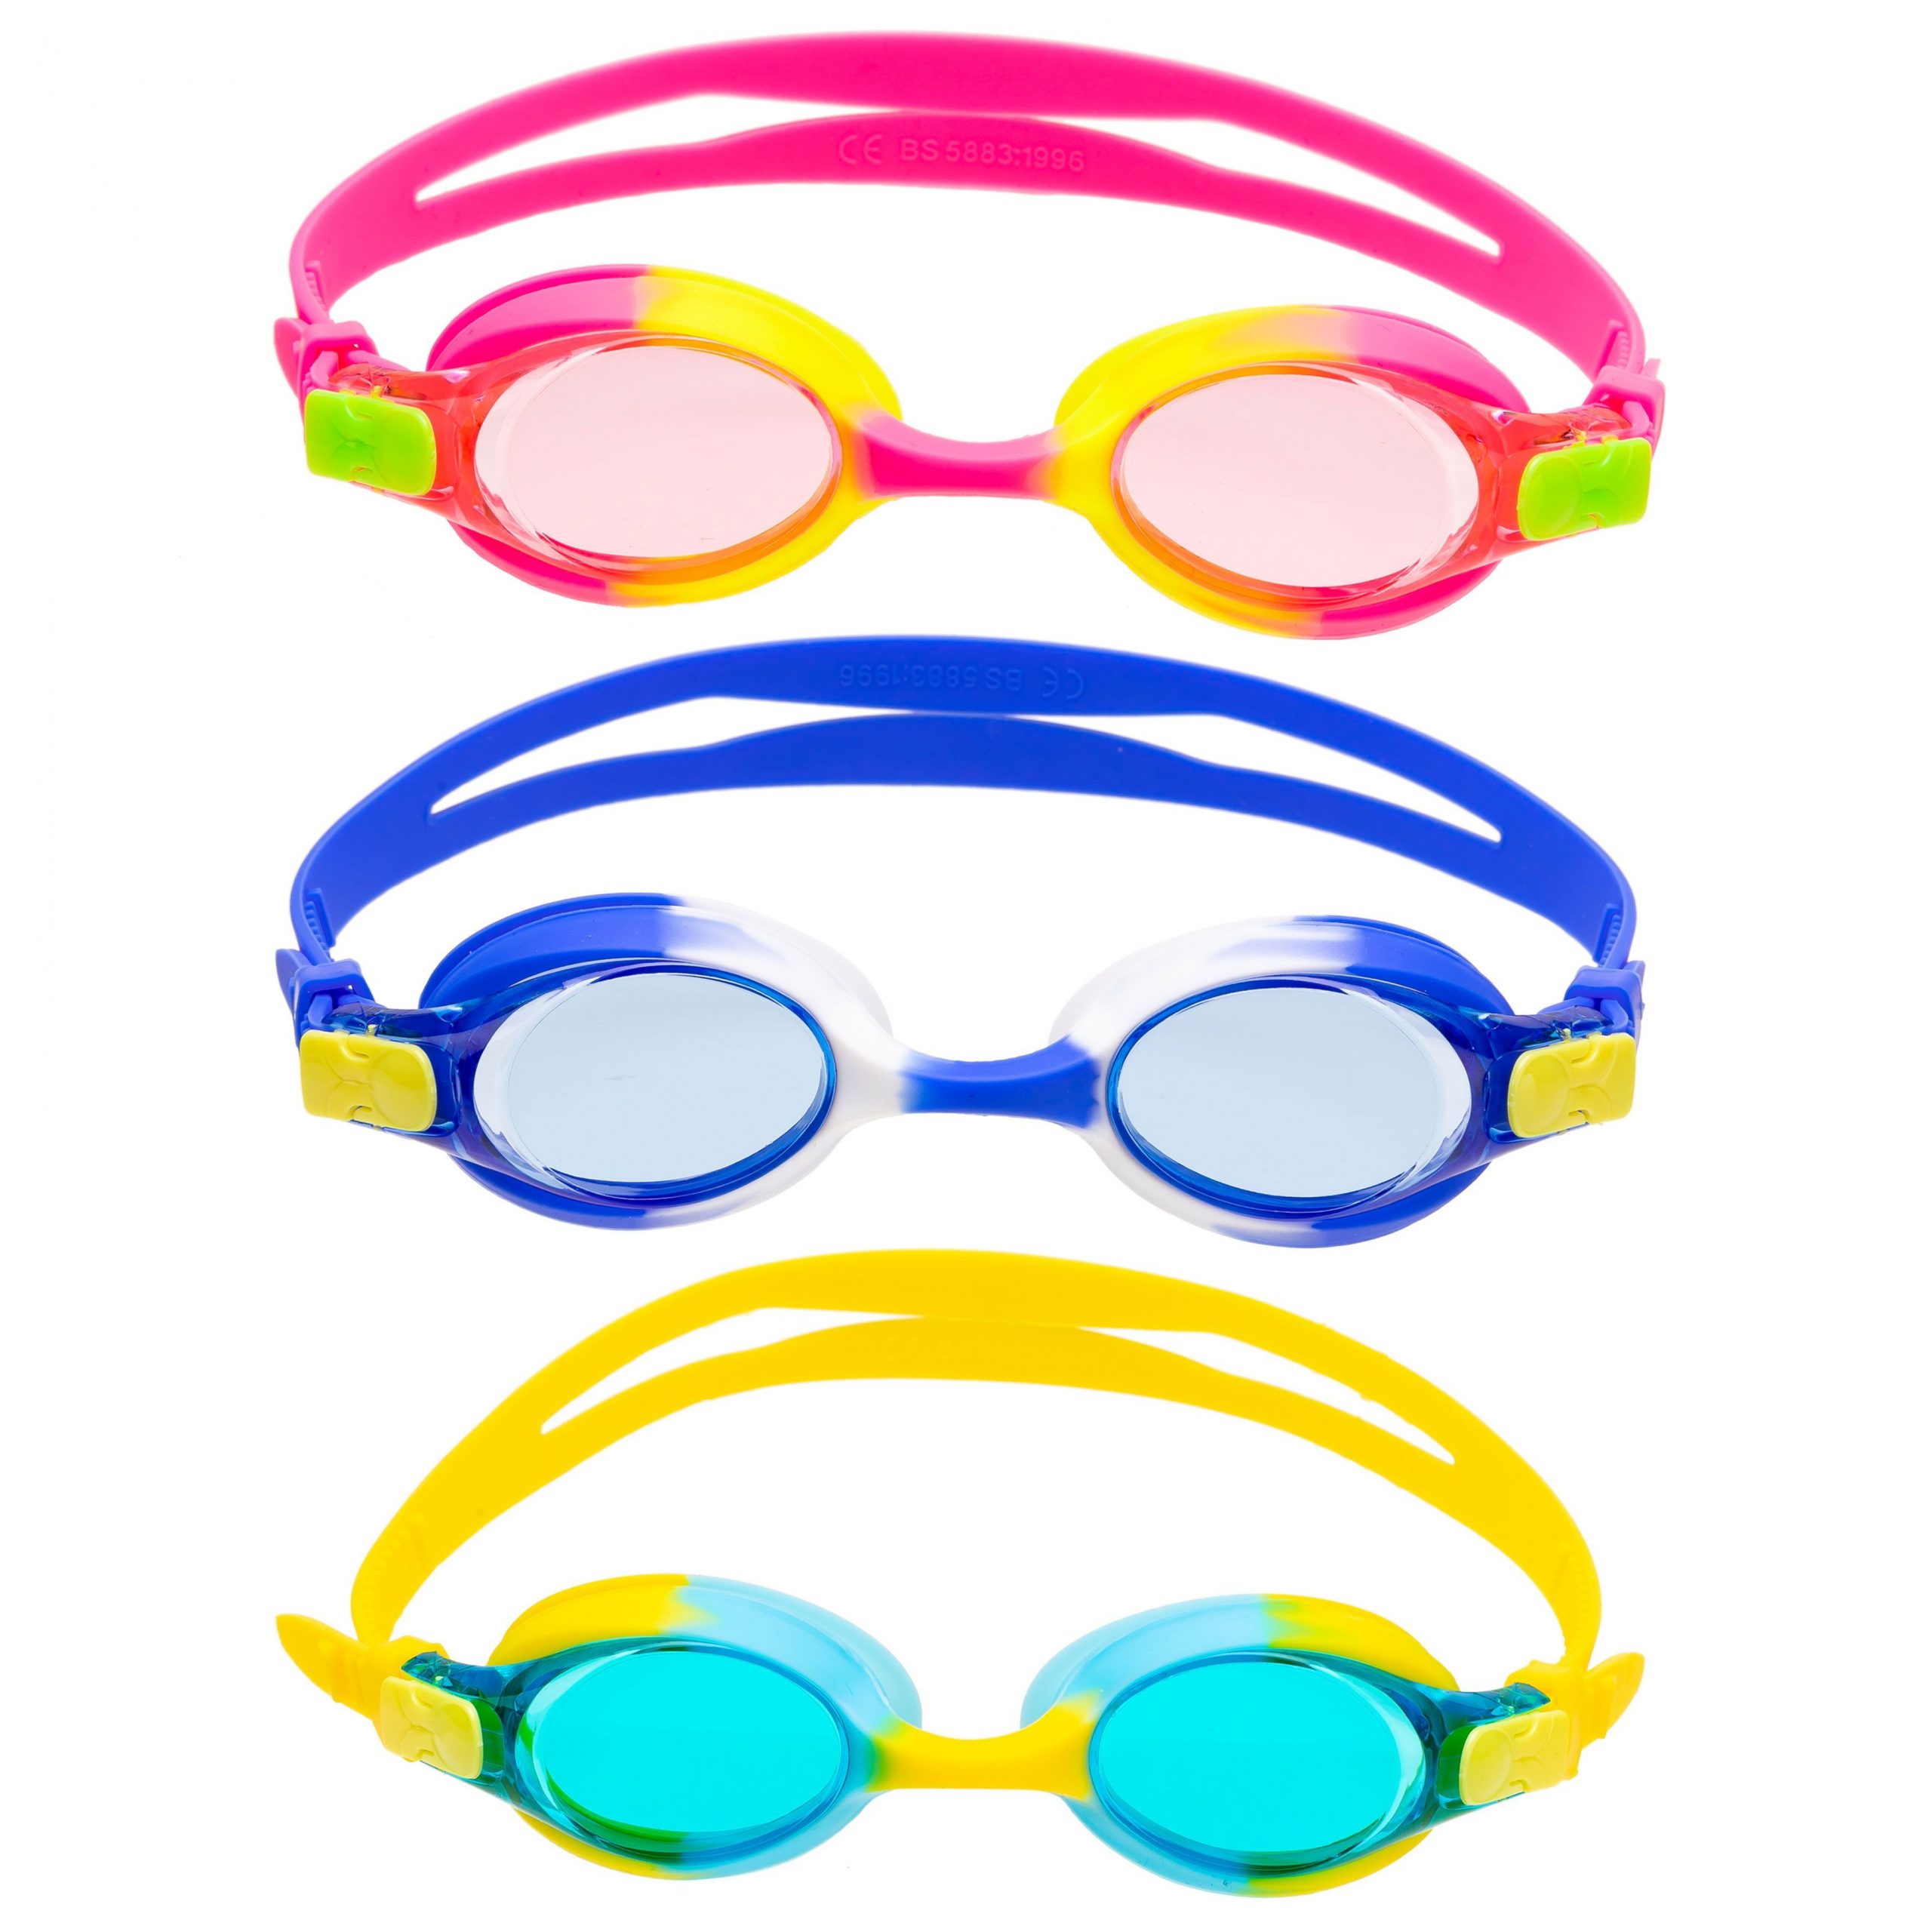 3 Pack Kids Swimming Goggles (Blue, Pink & Yellow)